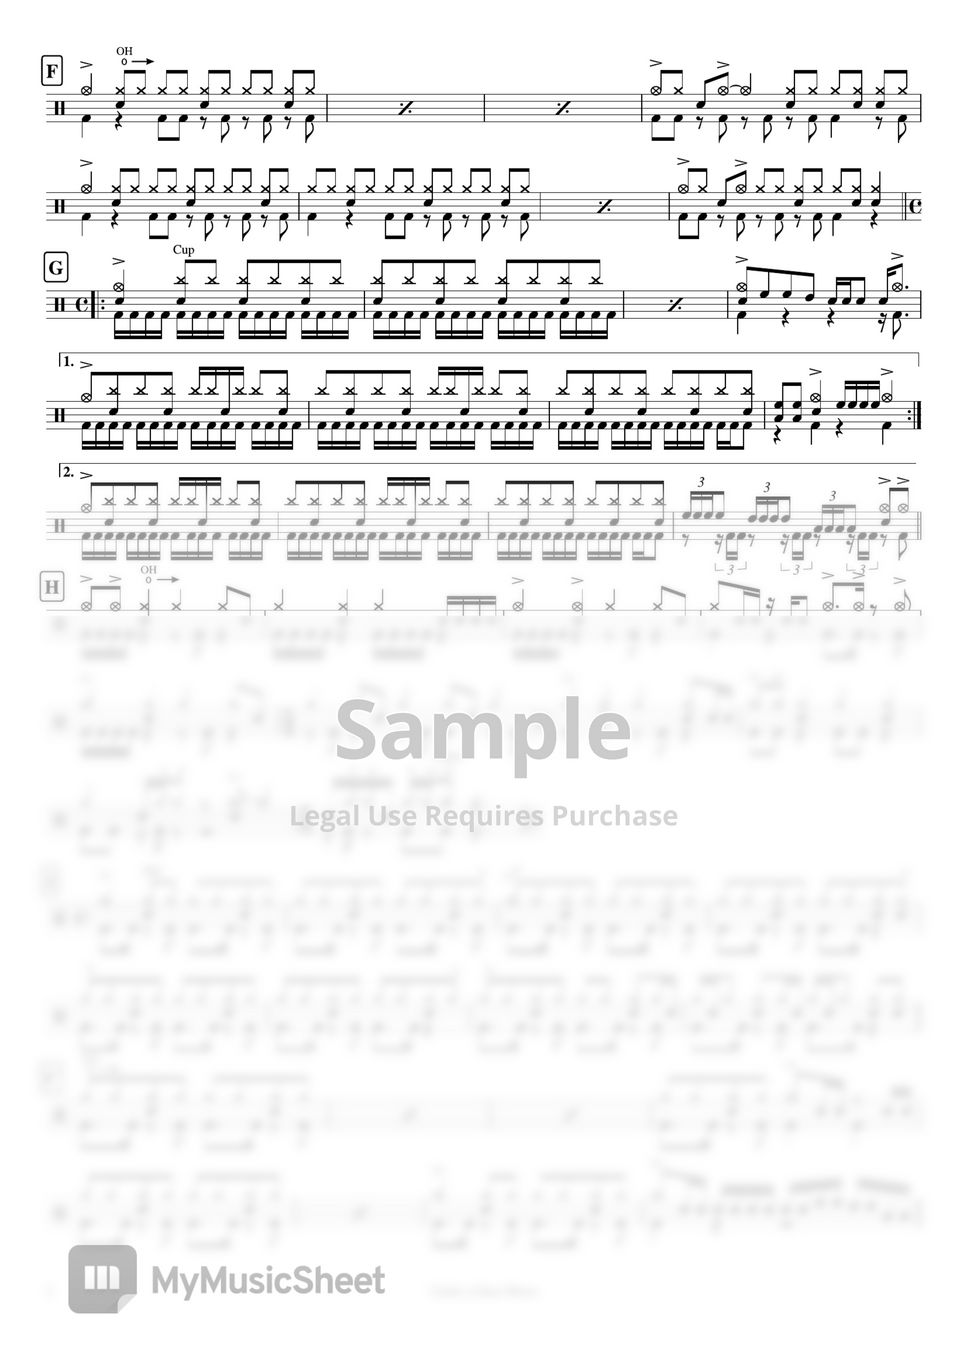 Dream Theater - Under a Glass Moon by Cookai's J-pop Drum sheet music!!!